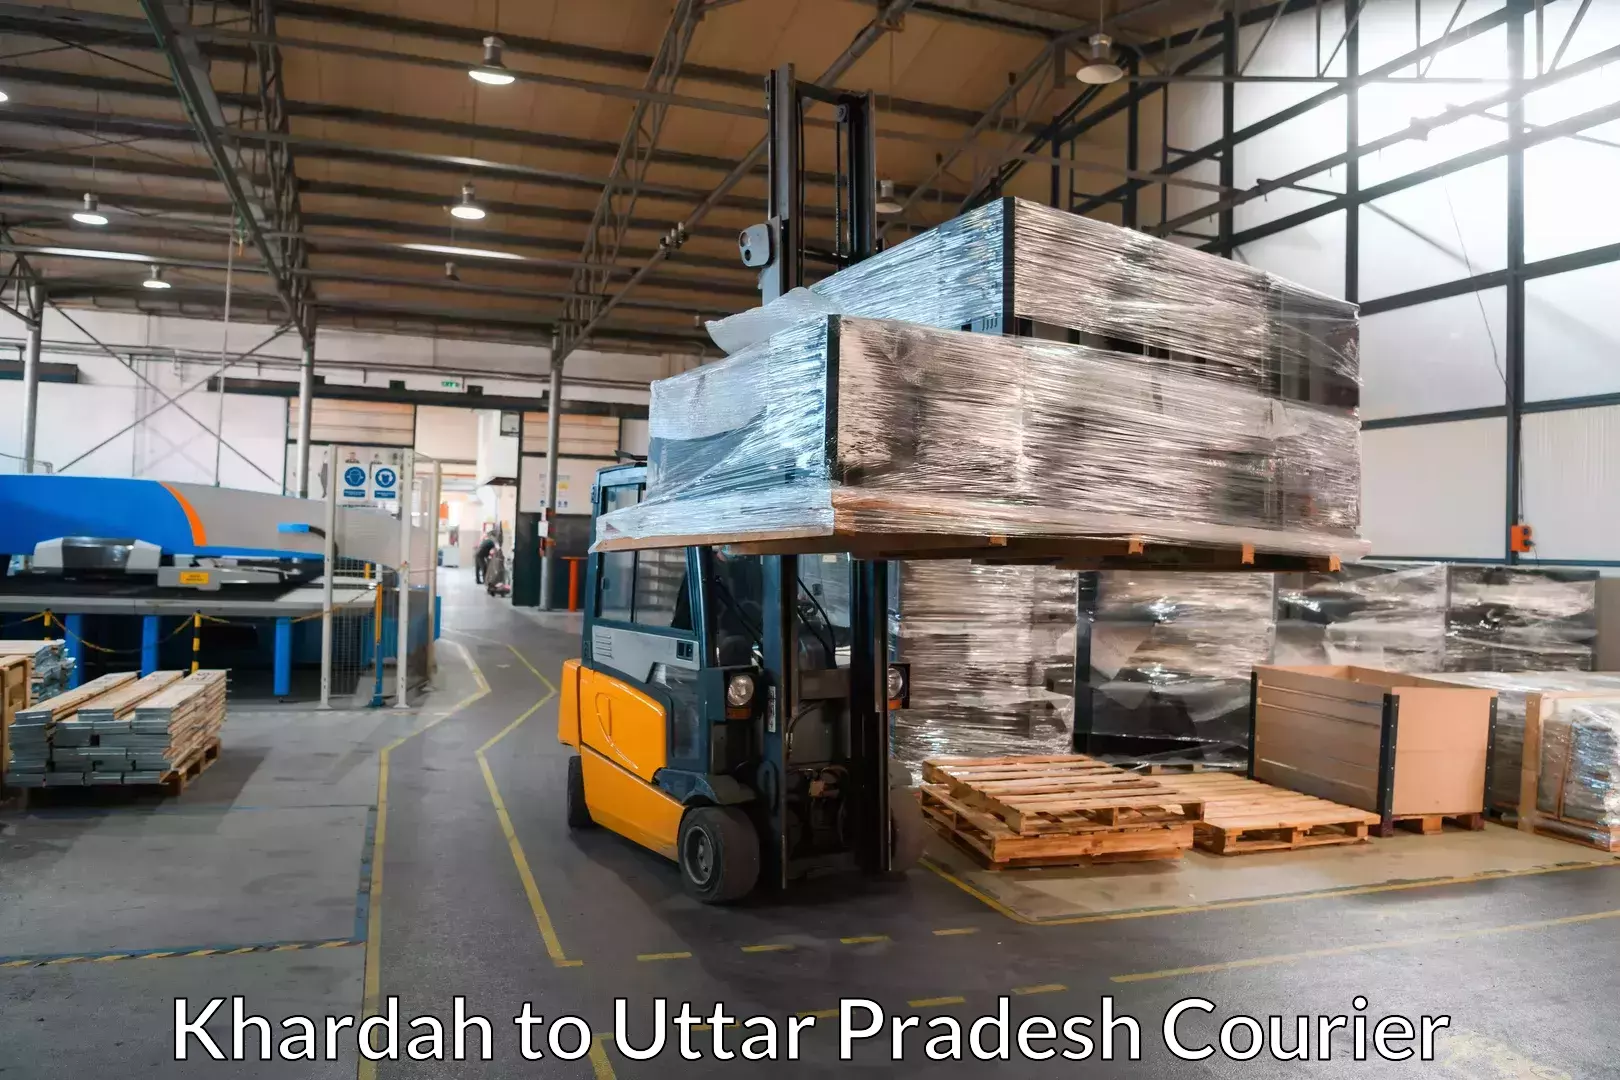 Cost-effective moving options Khardah to Sirathu